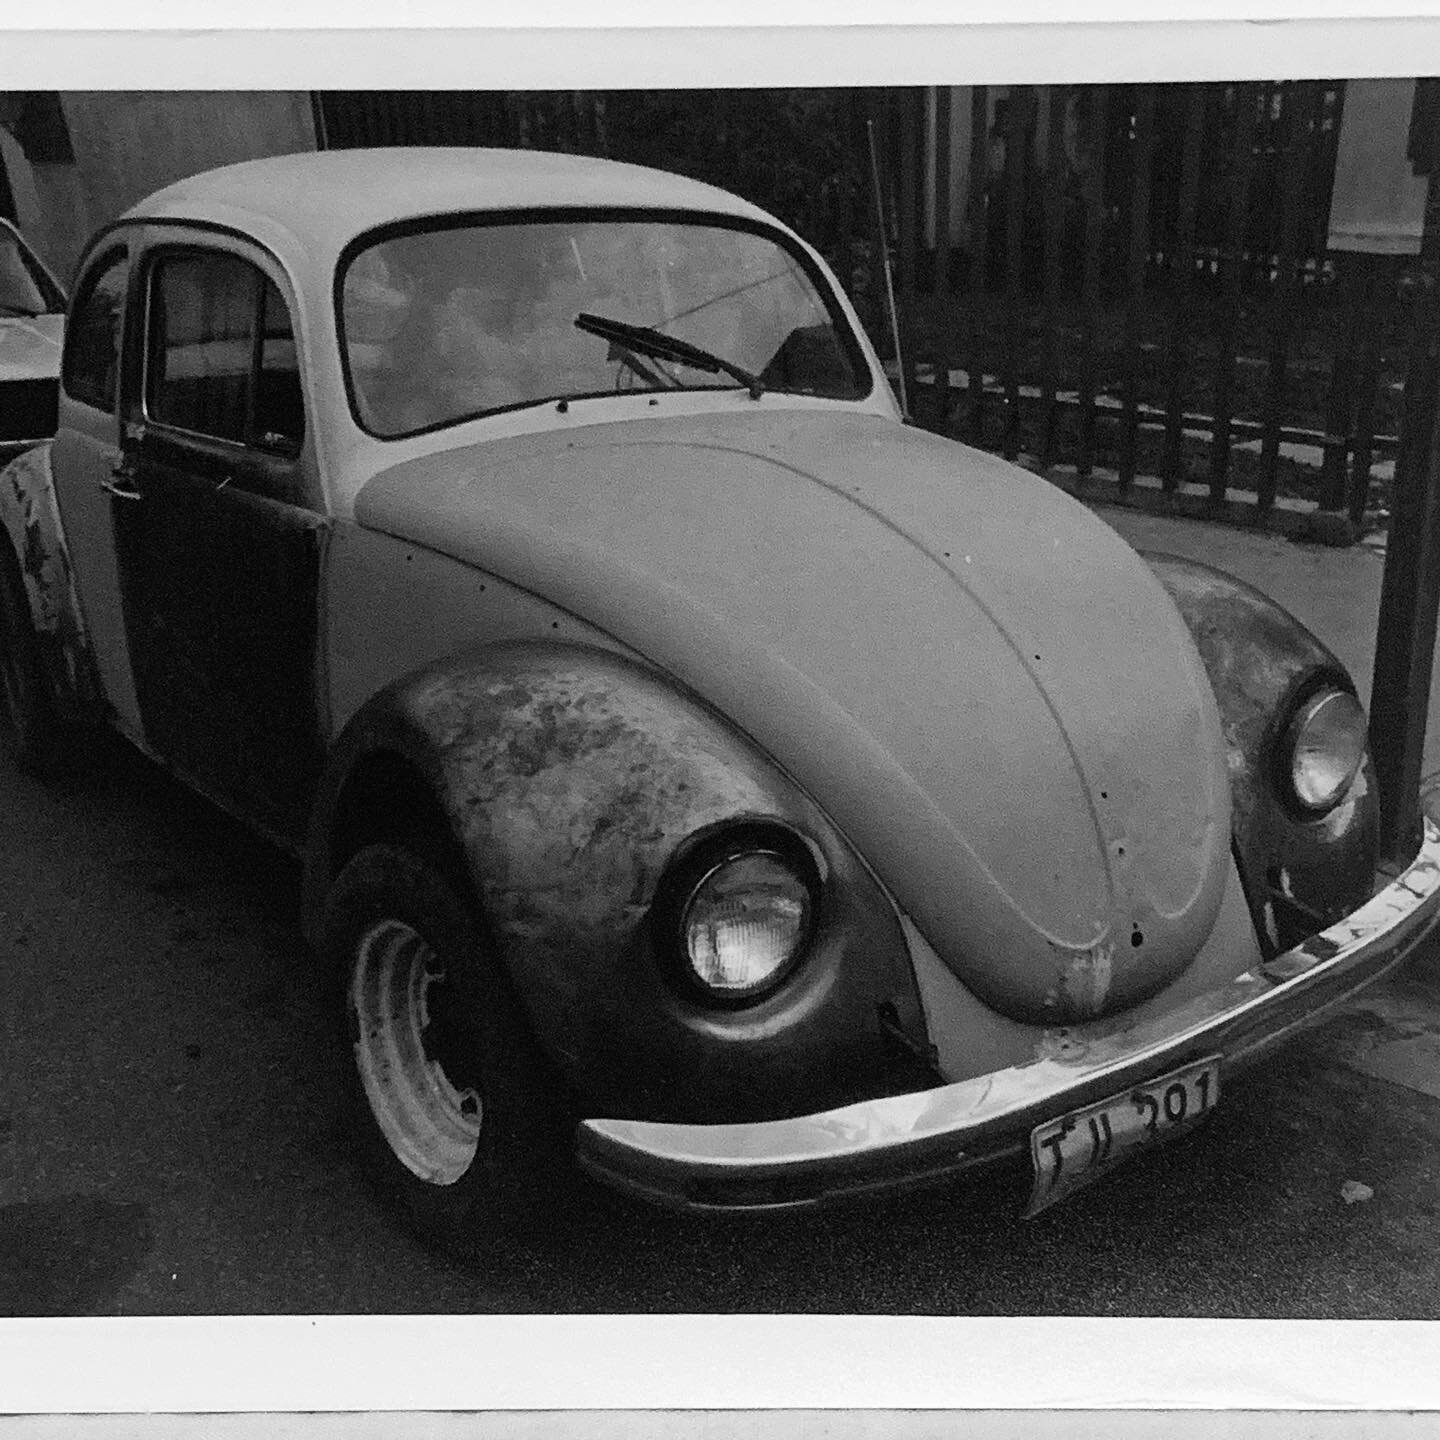 Volkswagen. Oaxaca, 1993
Not only did we grow up with various volkswagens in our driveway, our very household functioned like a Volkswagen. They weren&rsquo;t always the most functional or reliable vehicles, but they had the charm and simplicity of a